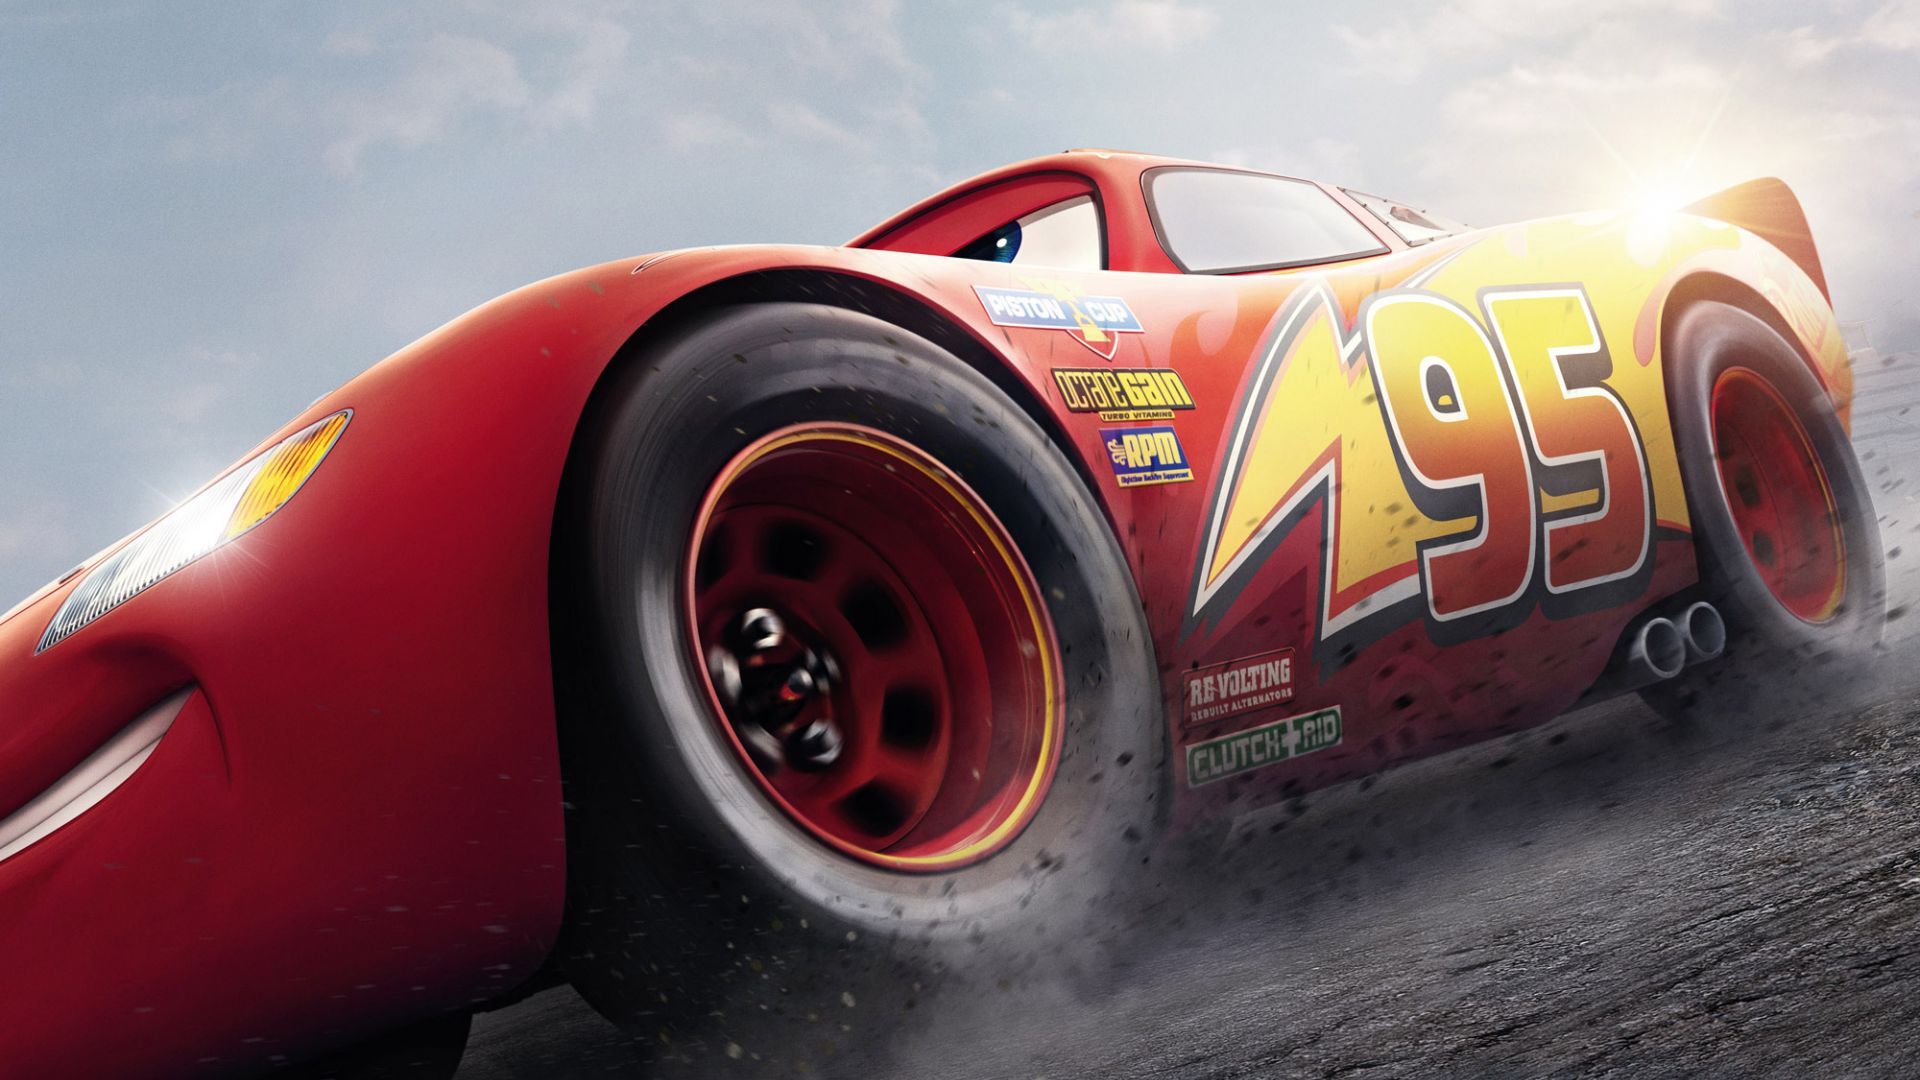 Desktop Wallpaper Lightning Mc Queen, Cars 3, Animated Movie, Hd, Hd Image,  Picture, Background, Iorf5w